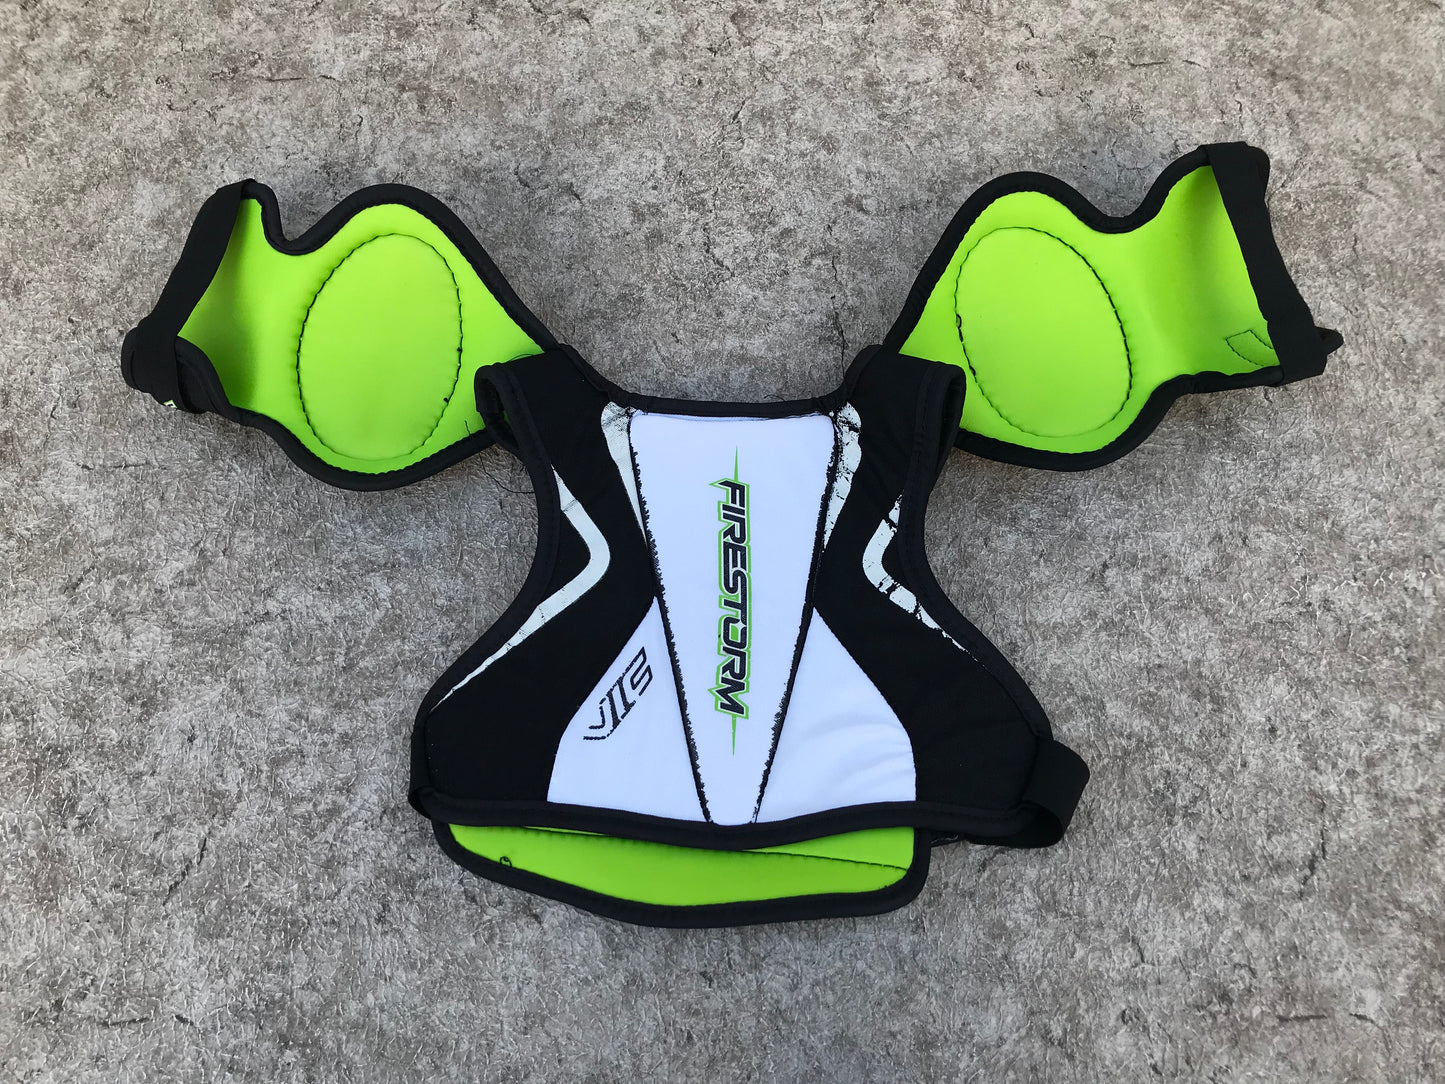 Hockey Shoulder Chest Pad Child Size Youth Large Vic Firestorm 5-6 Lime Black White